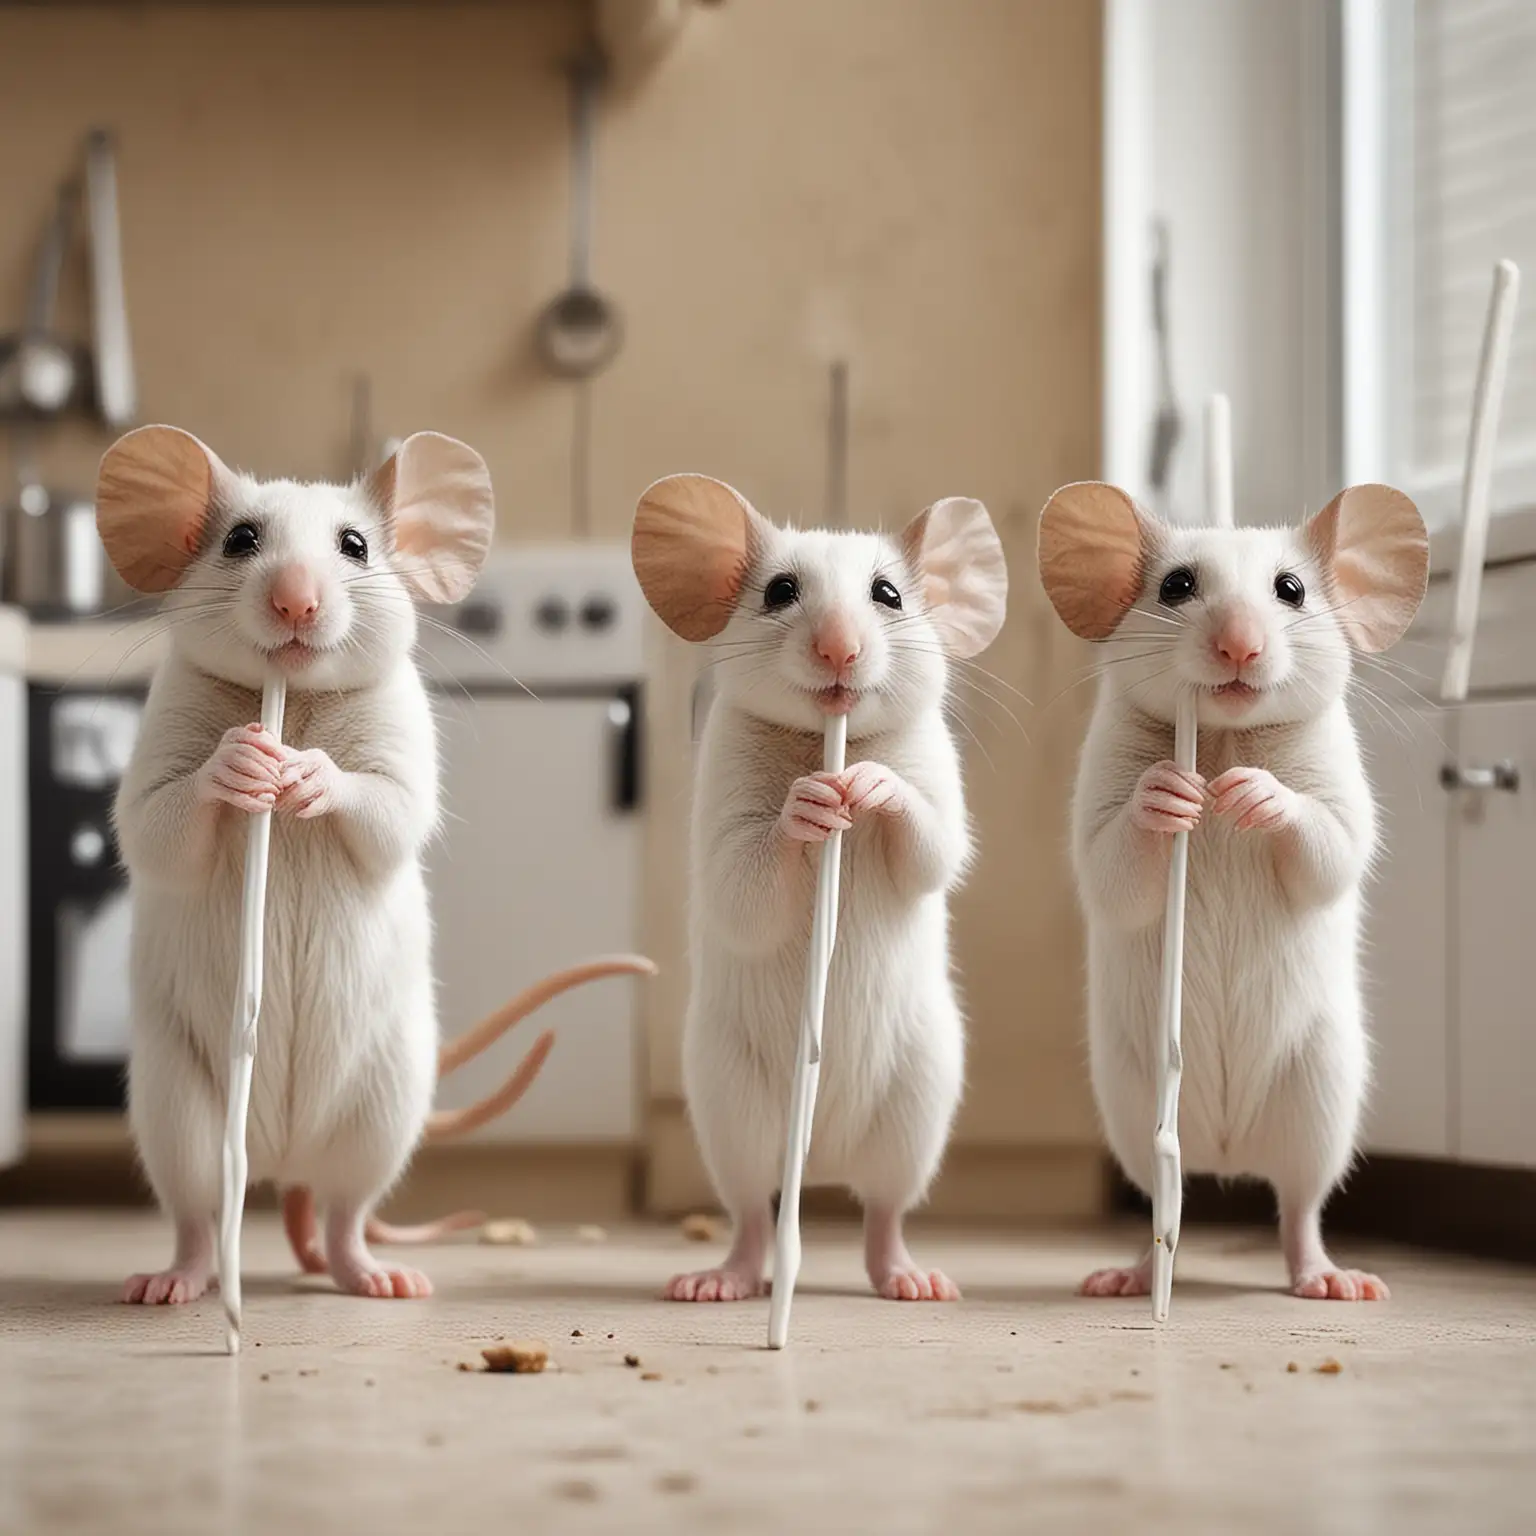 Three Blind Mice with White Canes in Kitchen Setting